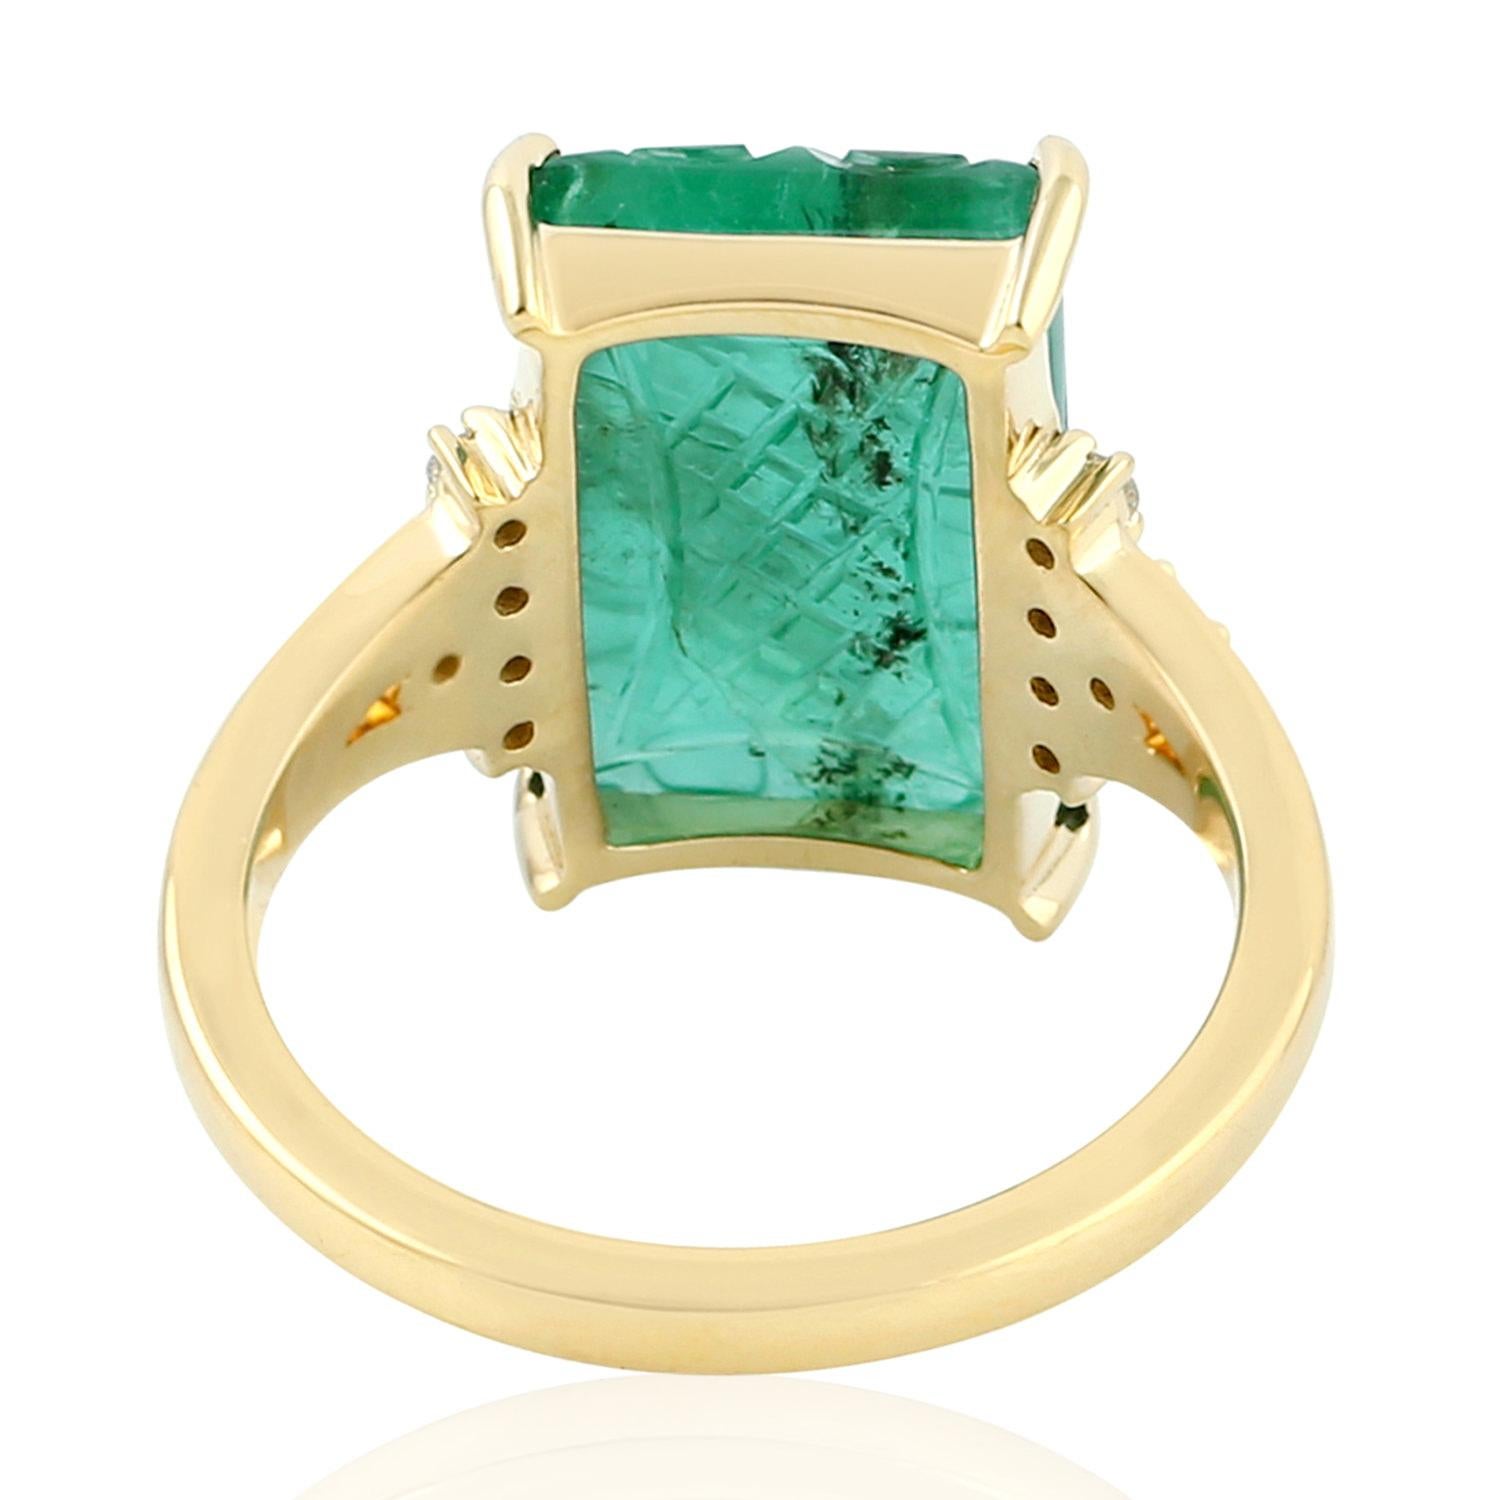 Emerald Cut Carved Emerald Cocktail Ring with Pave Diamonds Made in 18k Gold For Sale